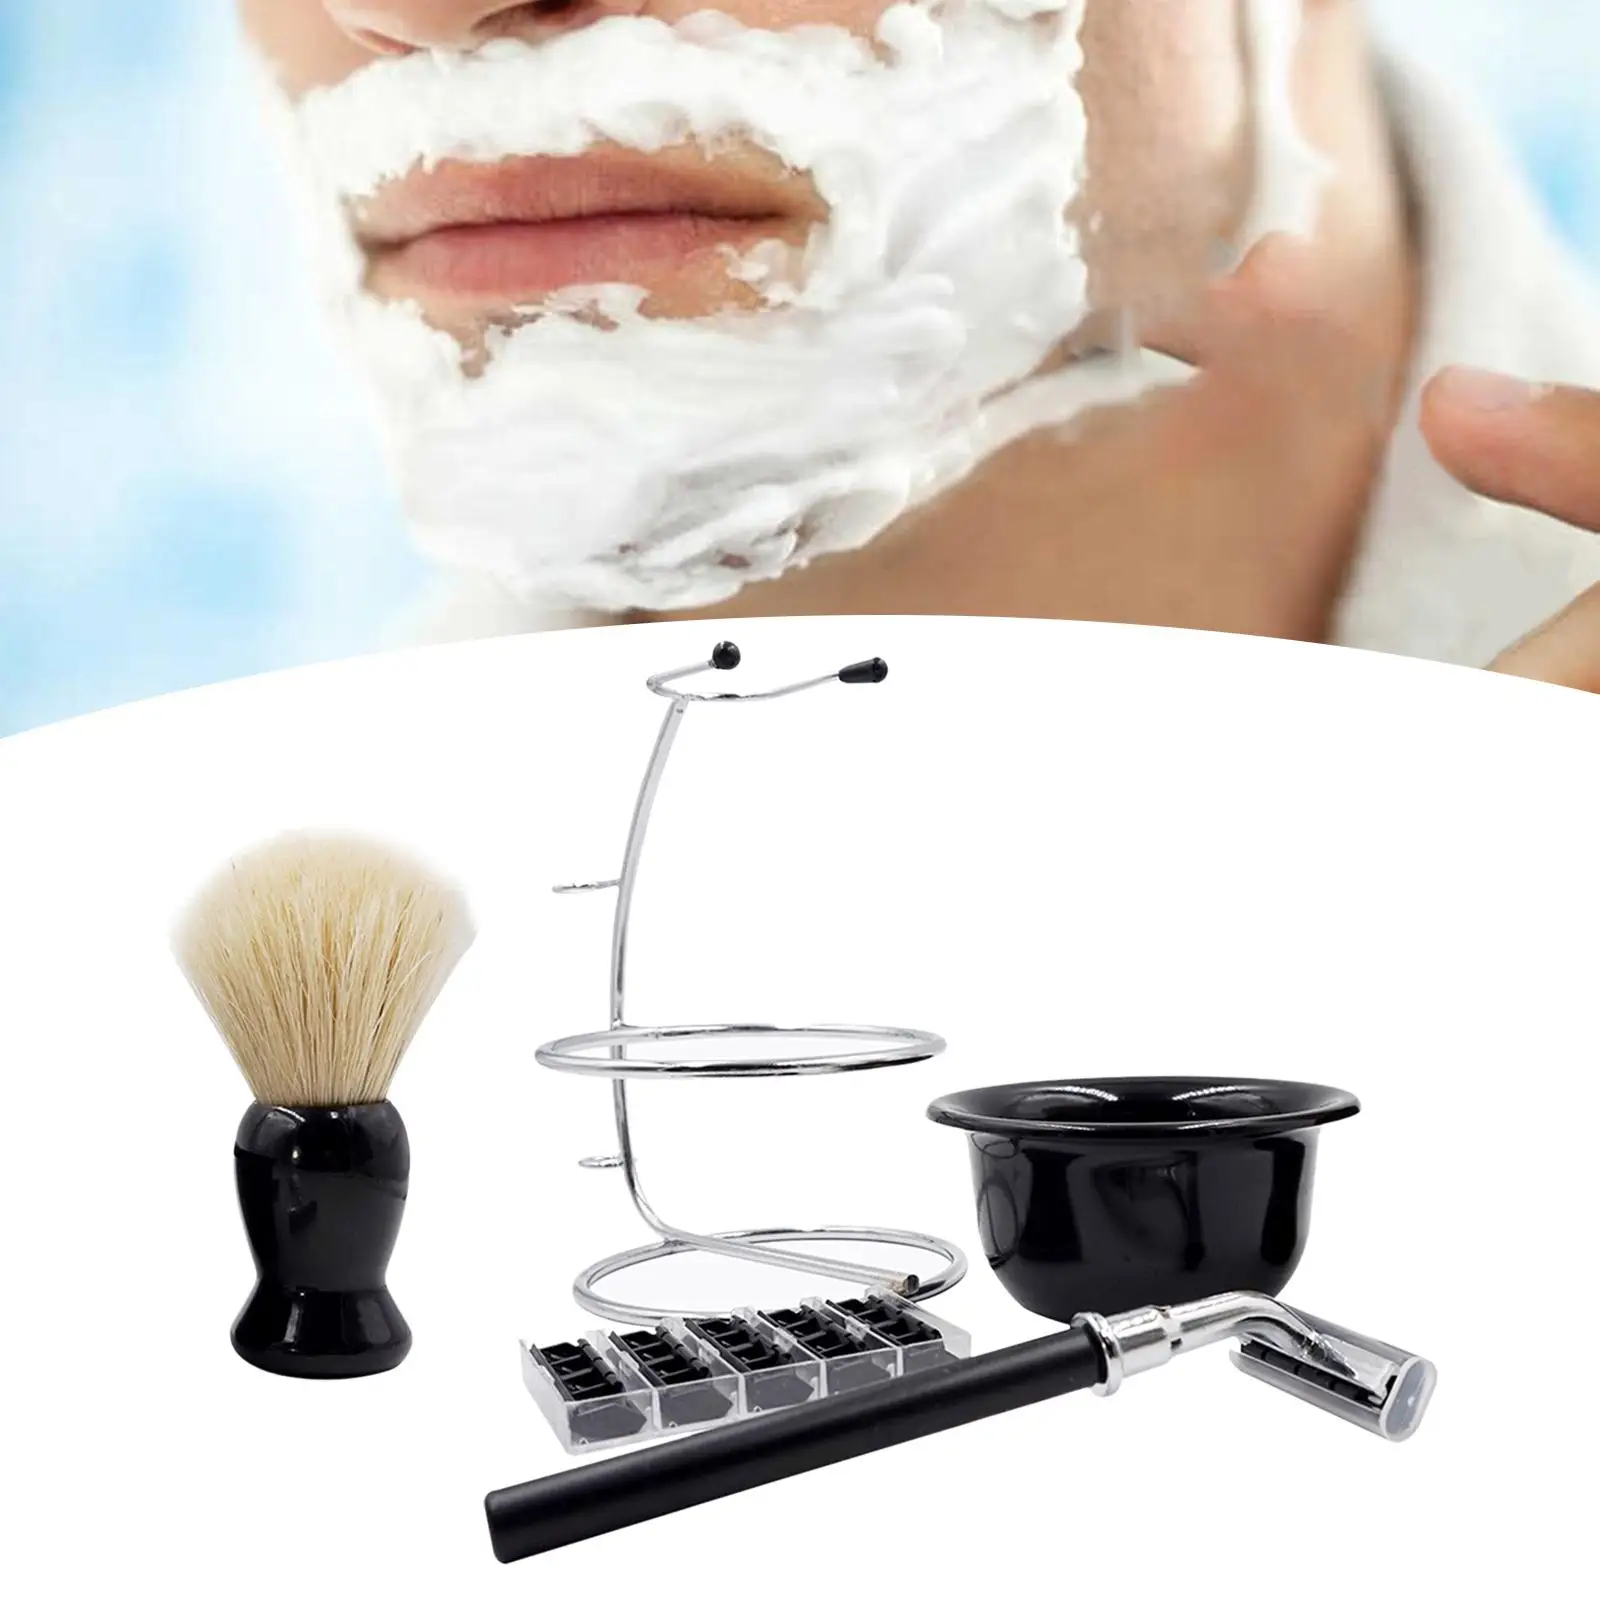 Men Shaving Set Manual Stand Brush Bowl Set Accessories Durable Weighted Bottom Professional Stainess Steel Holder Solid